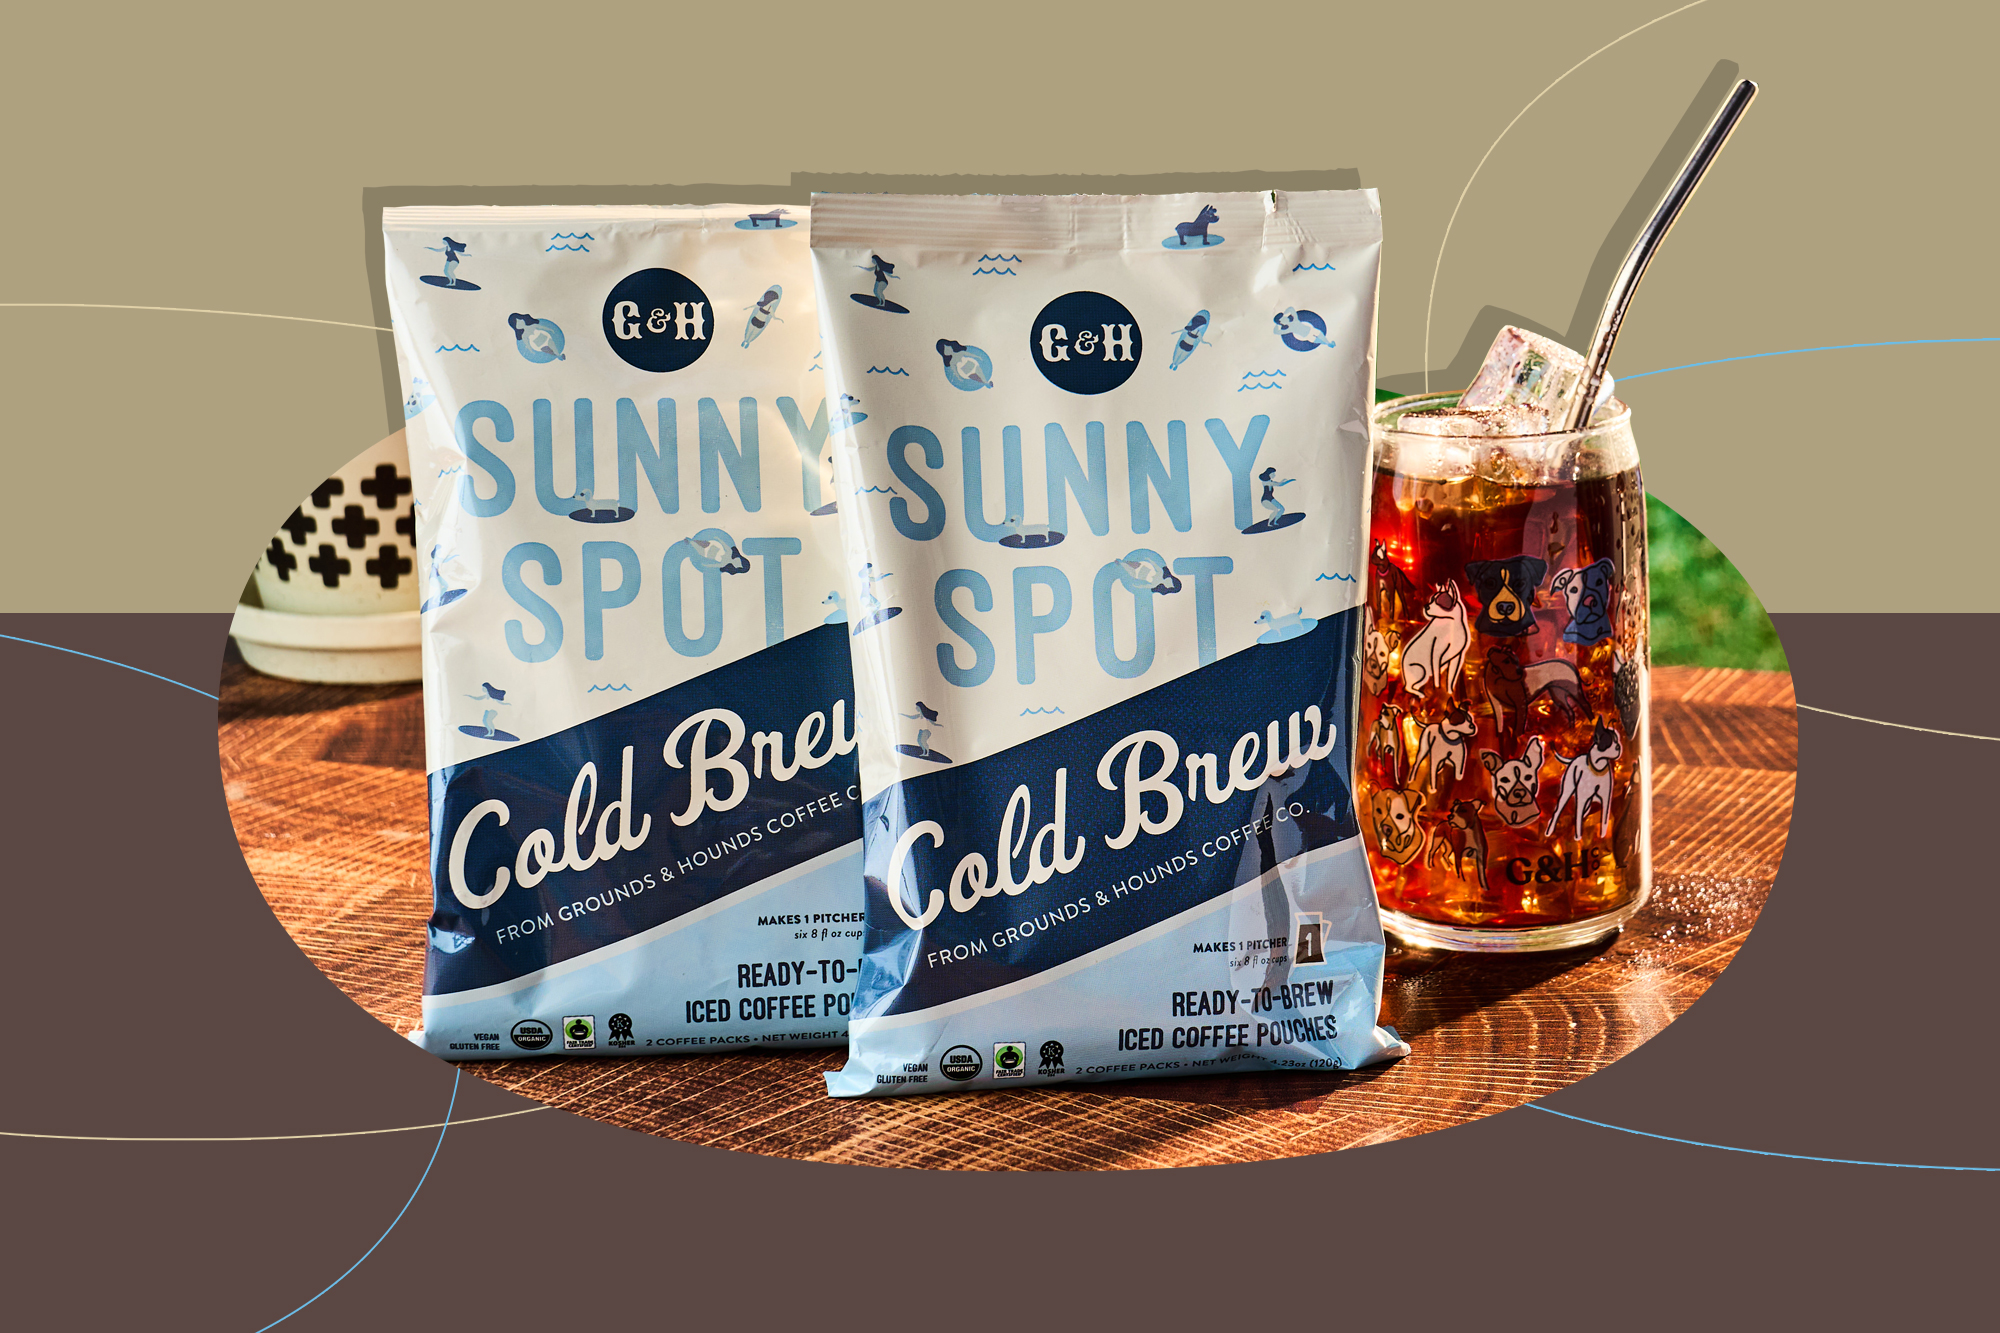 Sunny Spot Cold Brew Essentials - Grounds & Hounds Coffee Co.